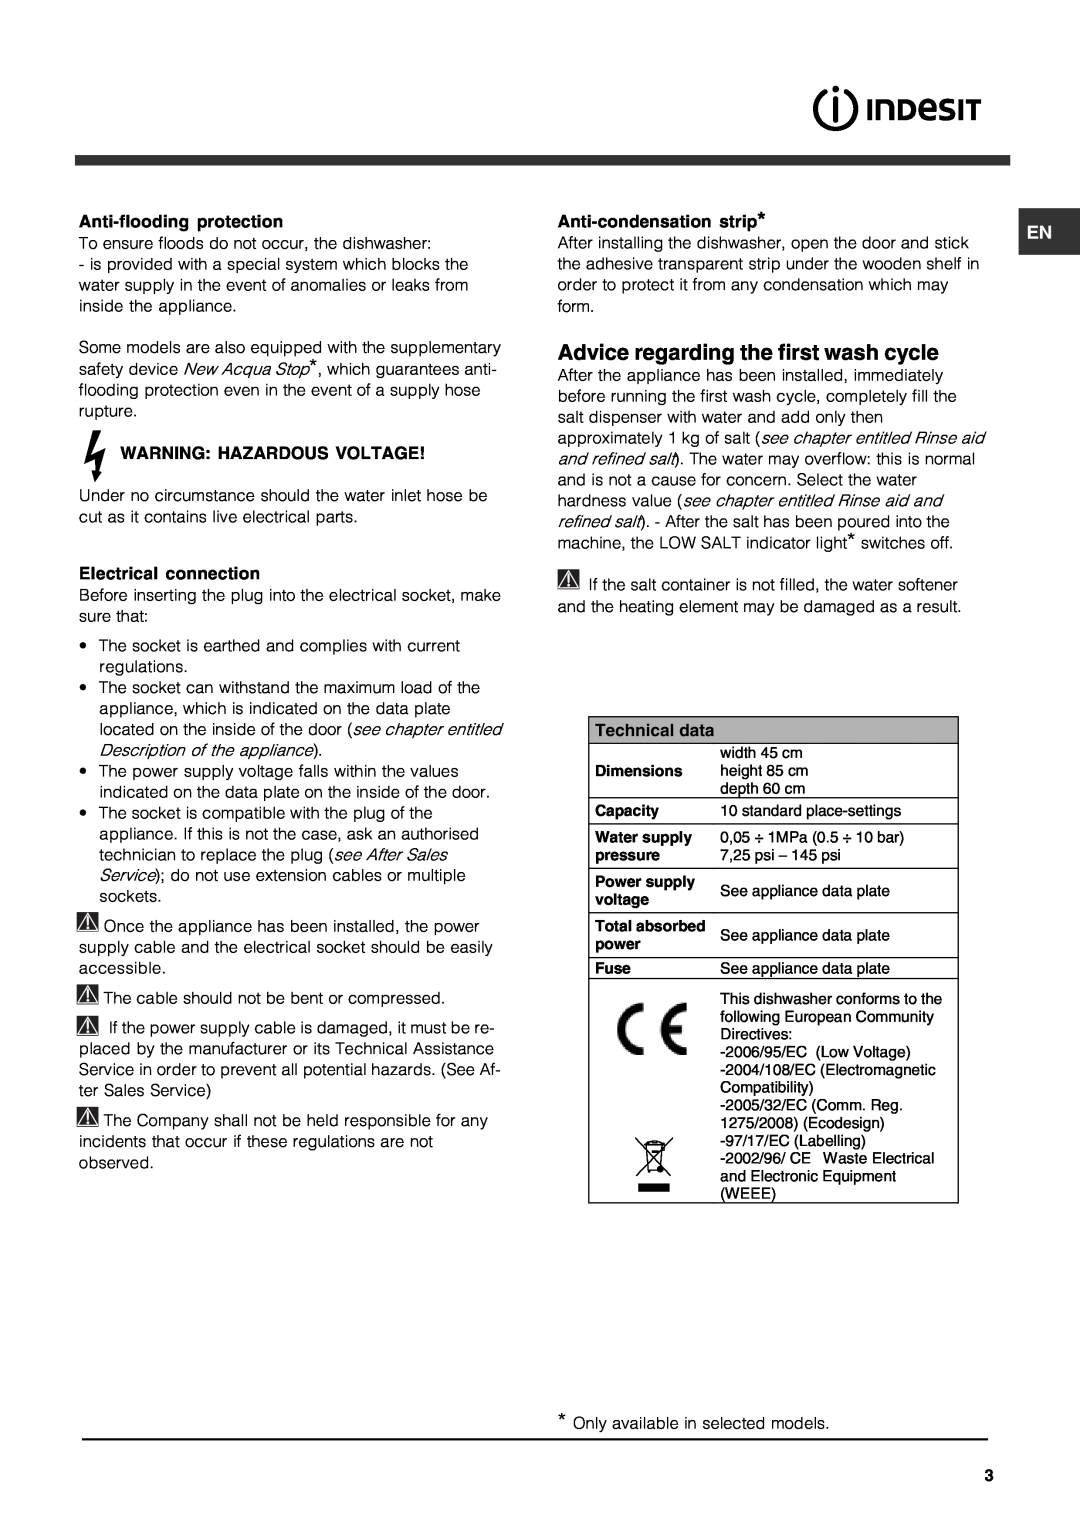 Indesit IDS 105 operating instructions Advice regarding the first wash cycle, Technical data 